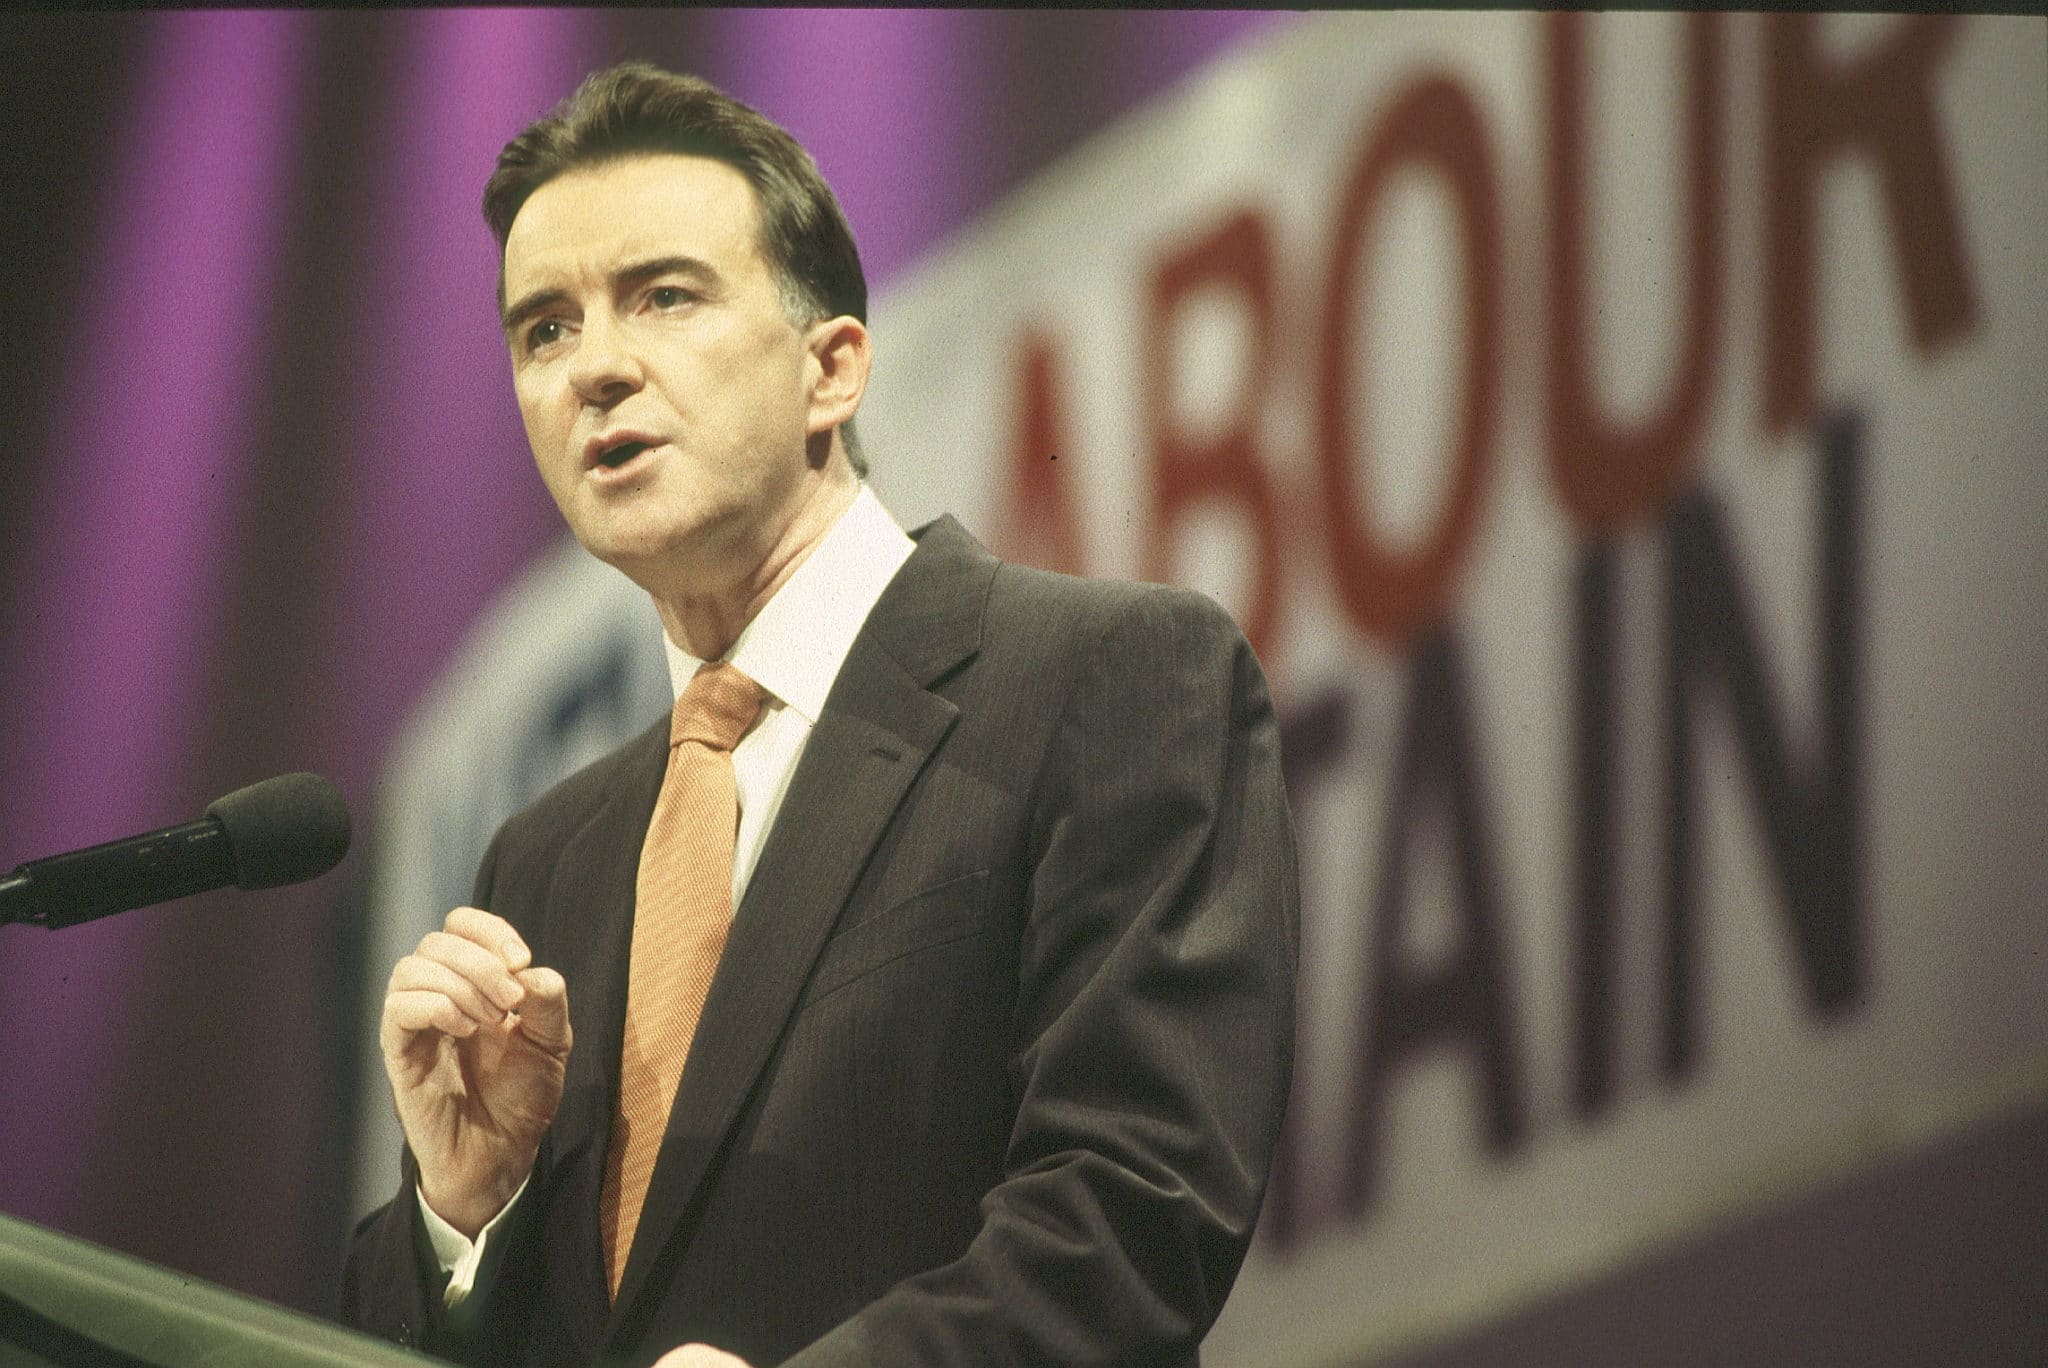 Minister for trade and industry Peter Mandelson at the 1998 Labour Party conference. 